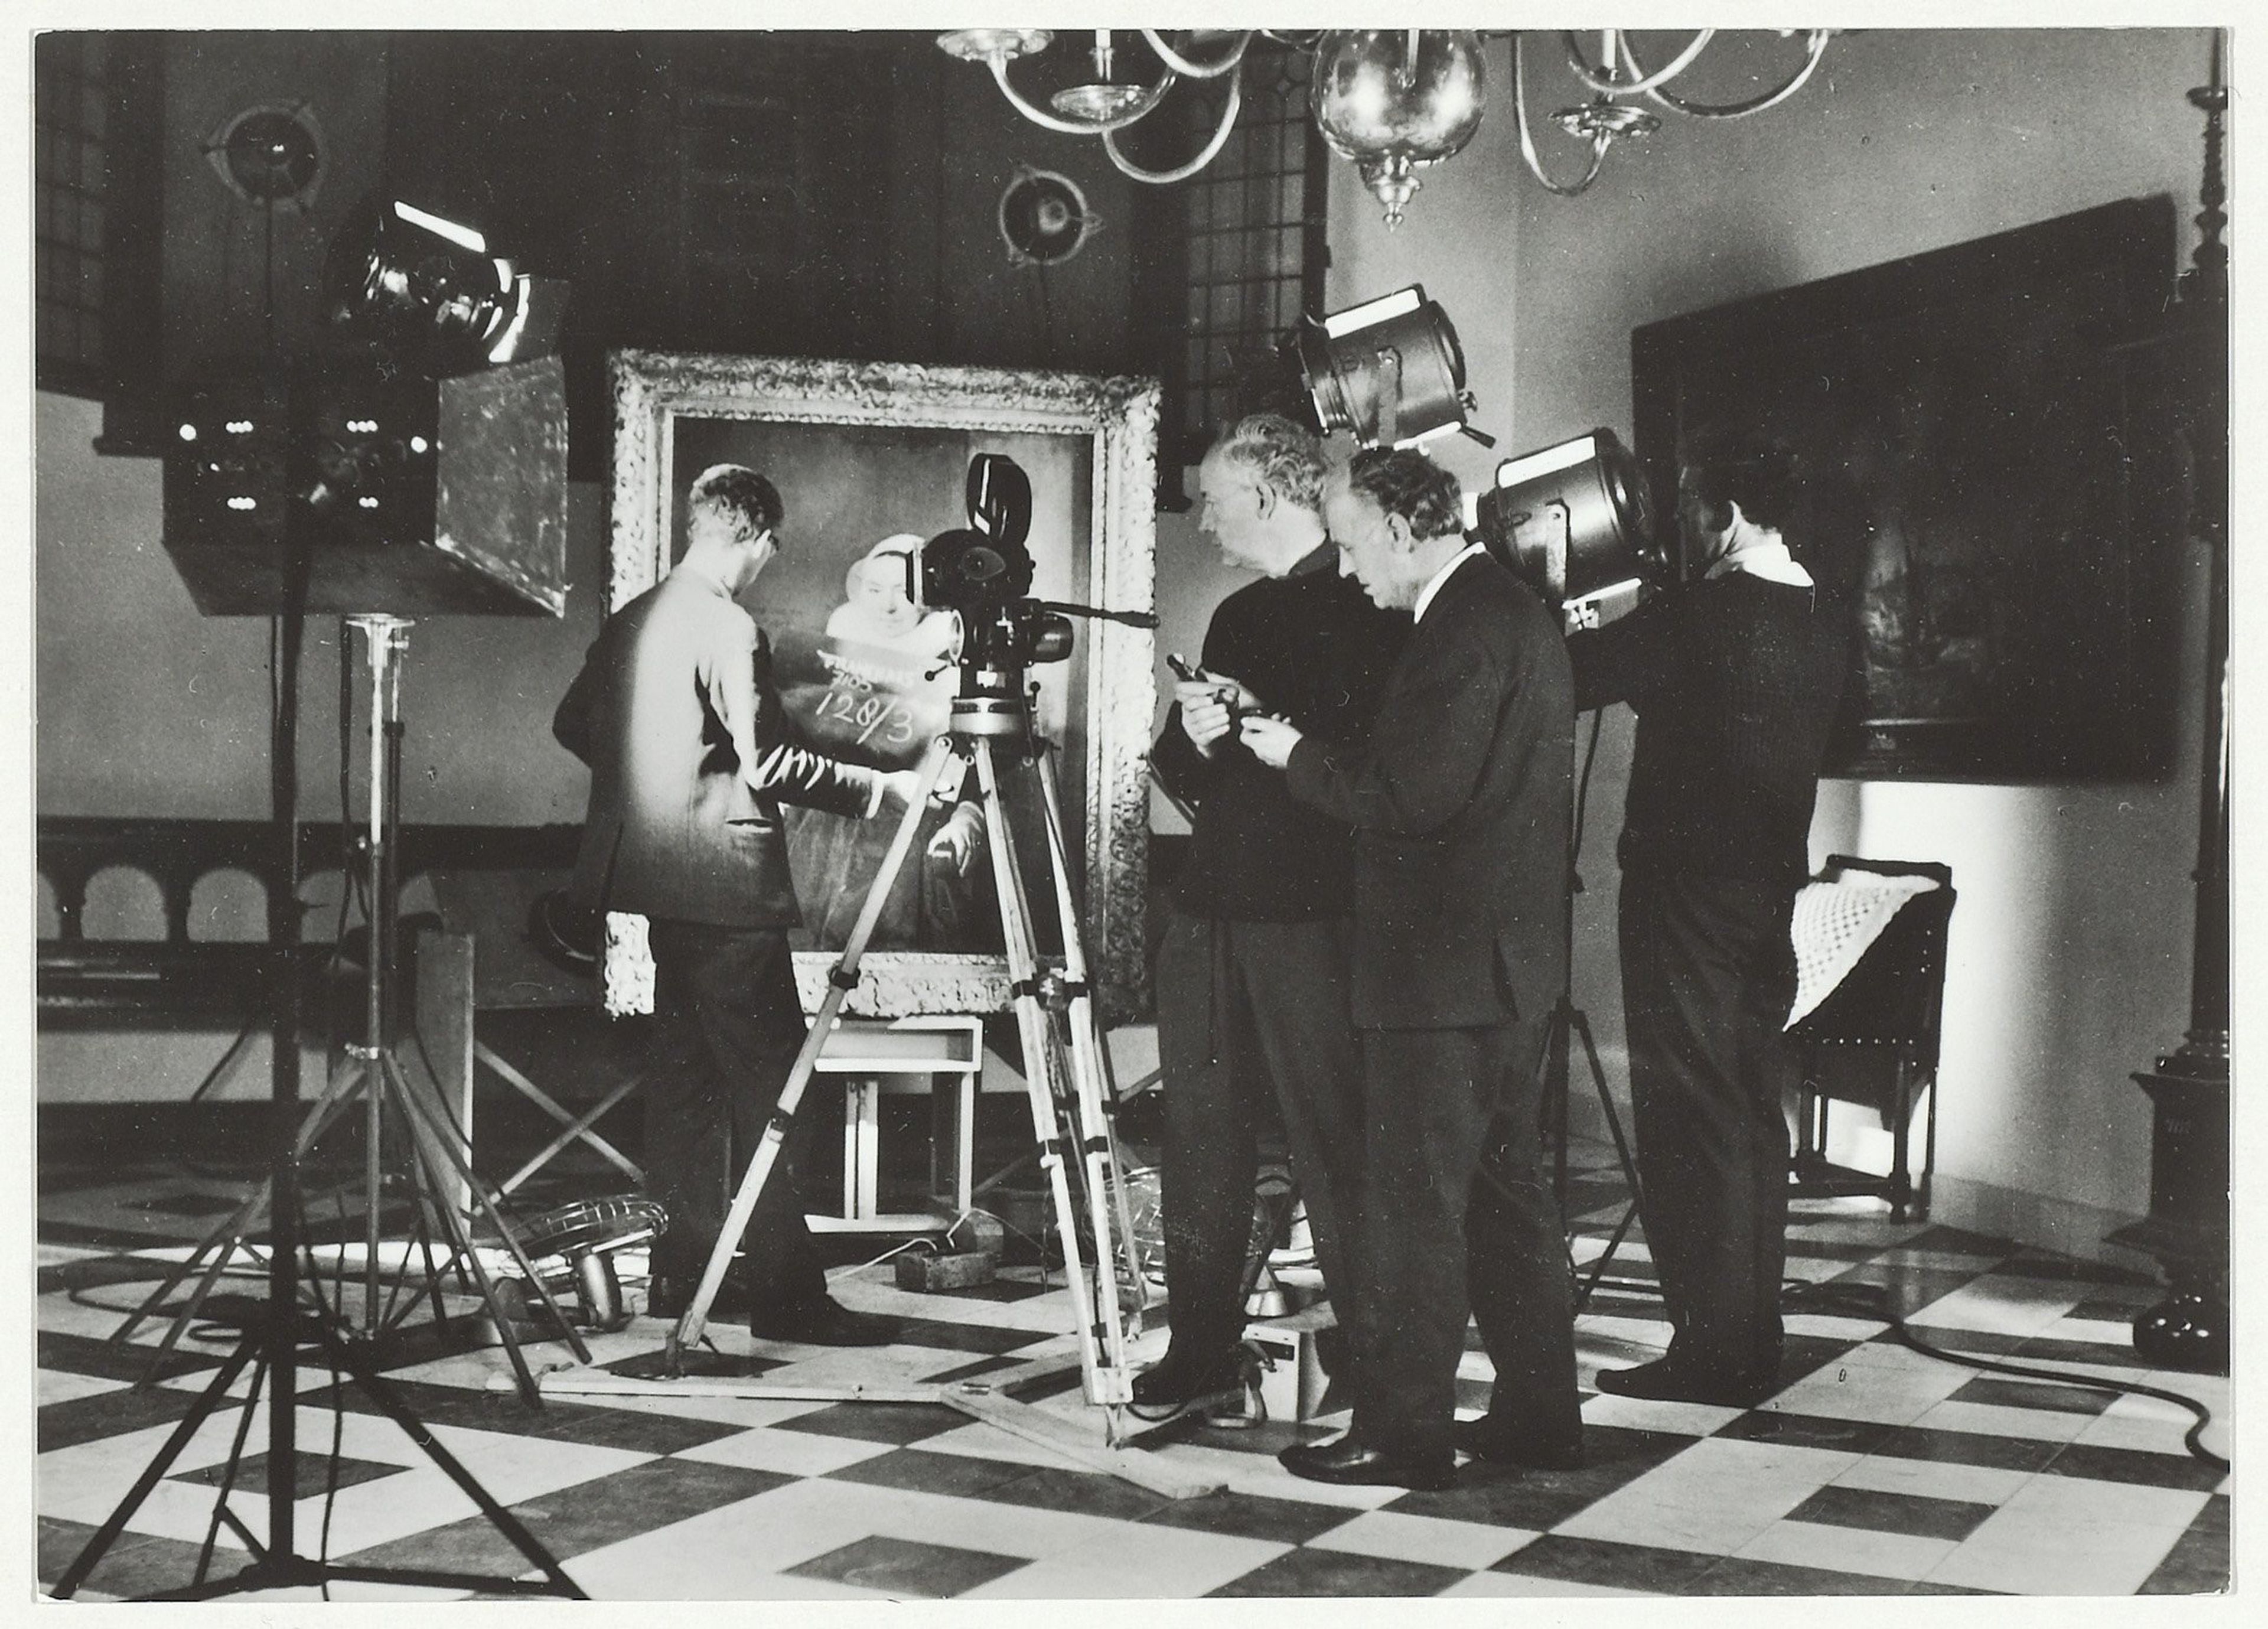 Film recordings of ‘Portrait of Frans Hals’ by Frans Dupont (ca. 1962), by anonymous videographer, from the Noord-Hollands Archief (North Holland Archive) 